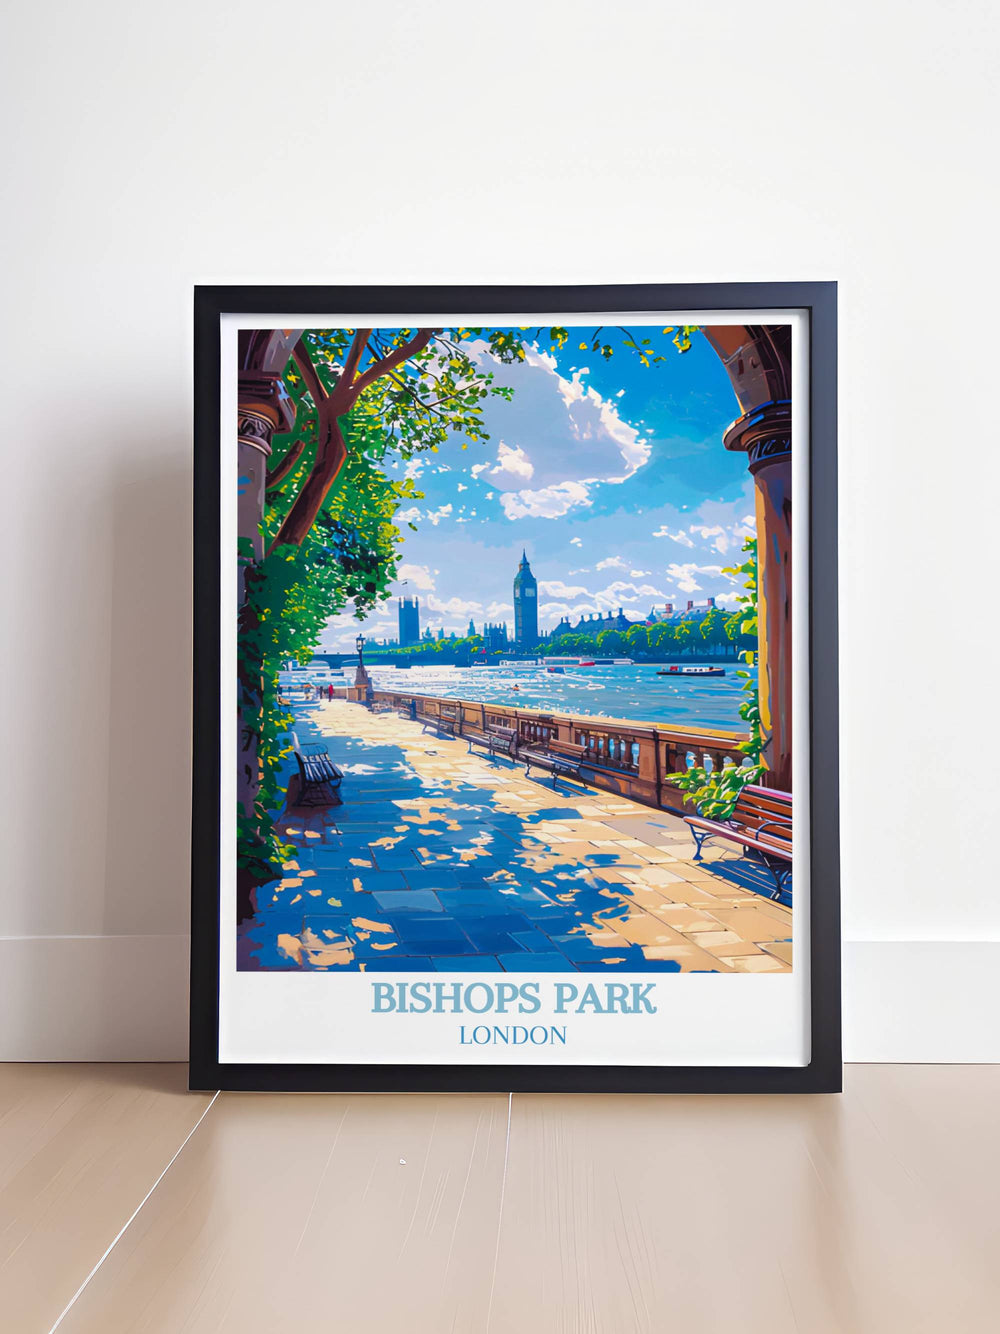 Thames River Walk art print highlighting the beauty and charm of Londons renowned riverside walk